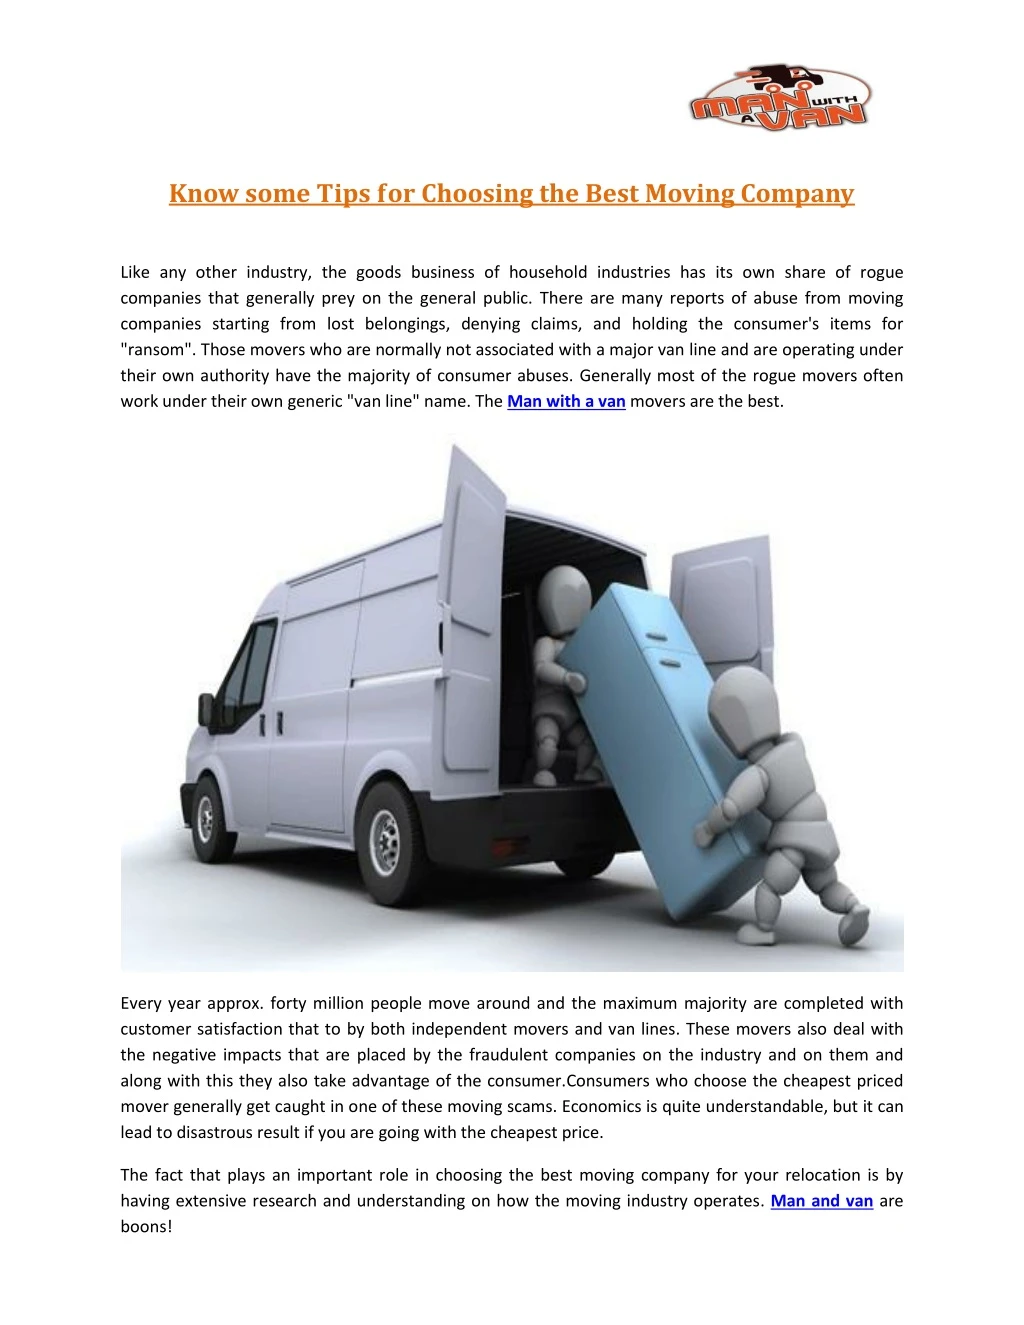 know some tips for choosing the best moving